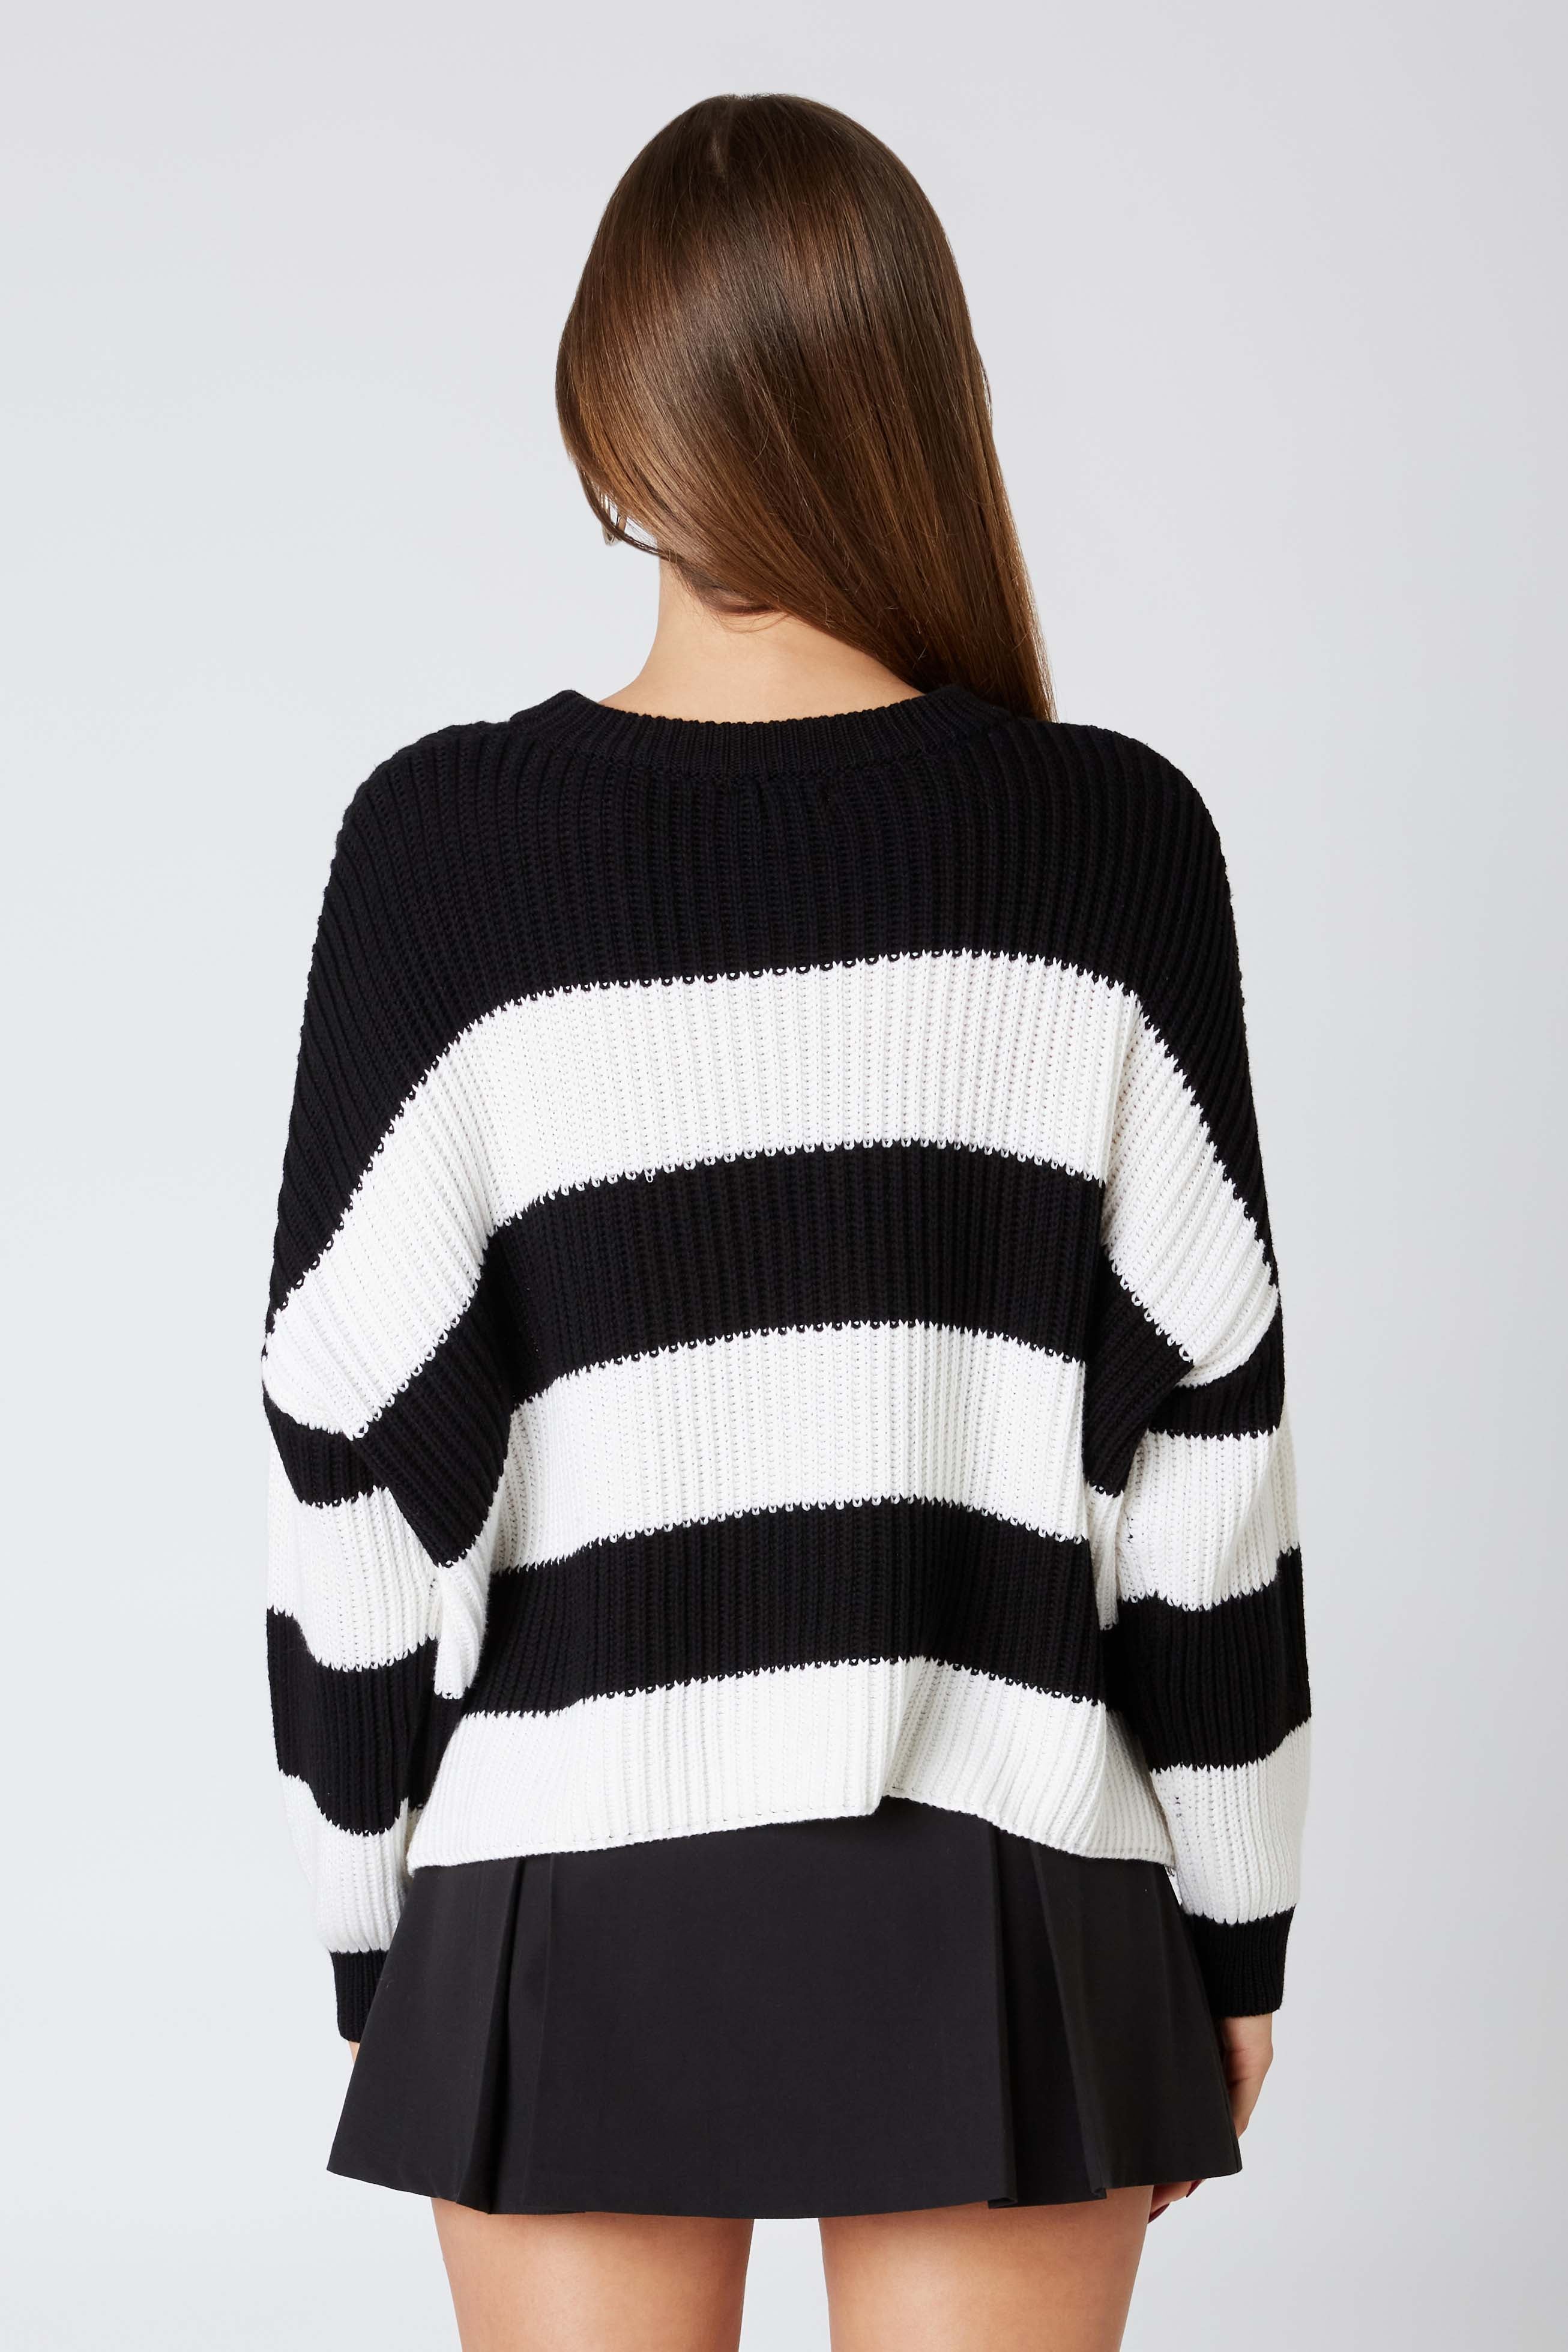 Rugby Oversized Sweater in Black White Back View